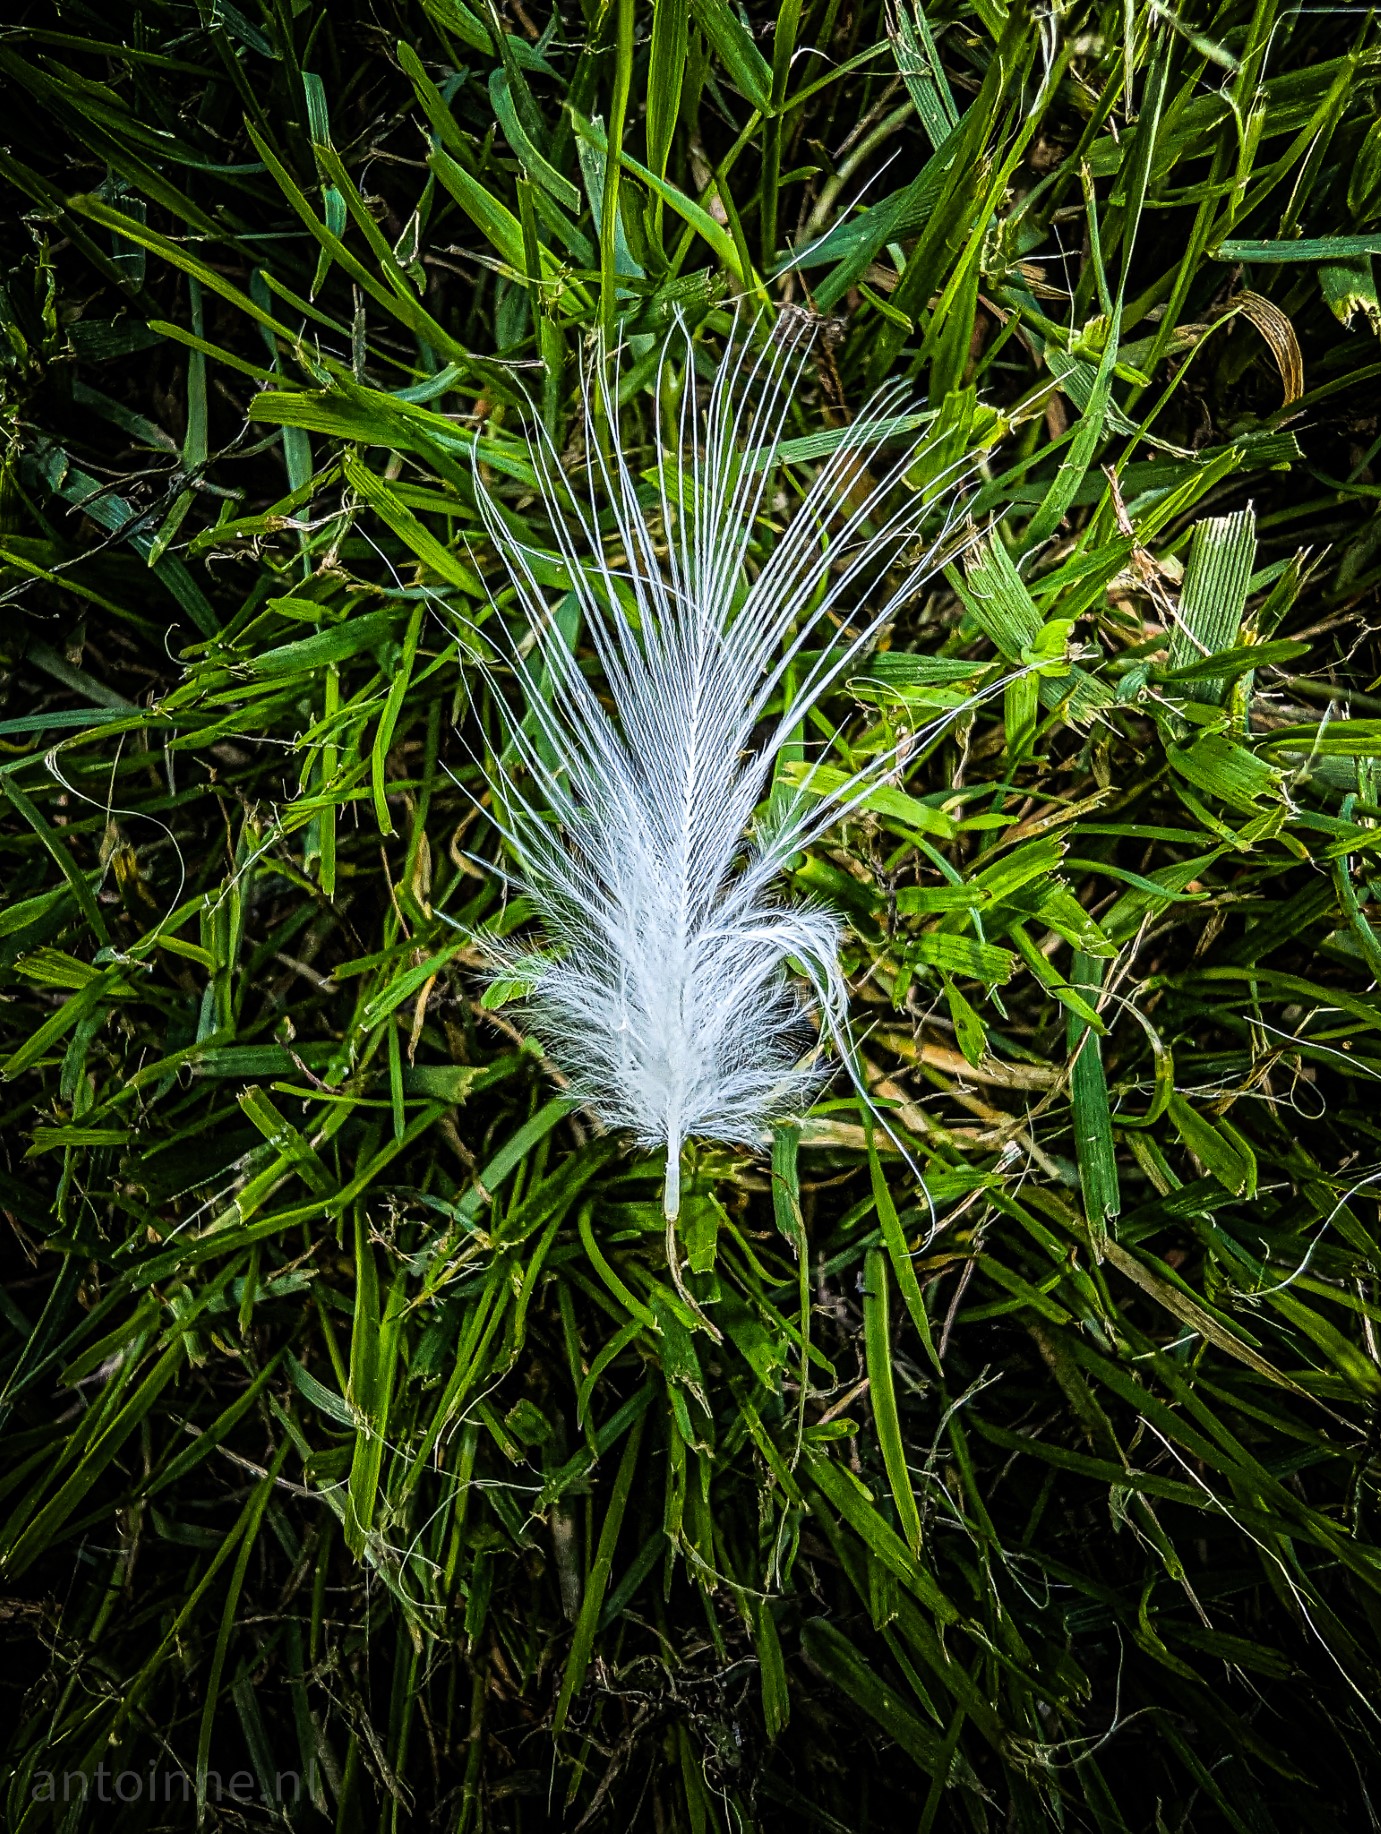 A small white feather of a bird in the grass.